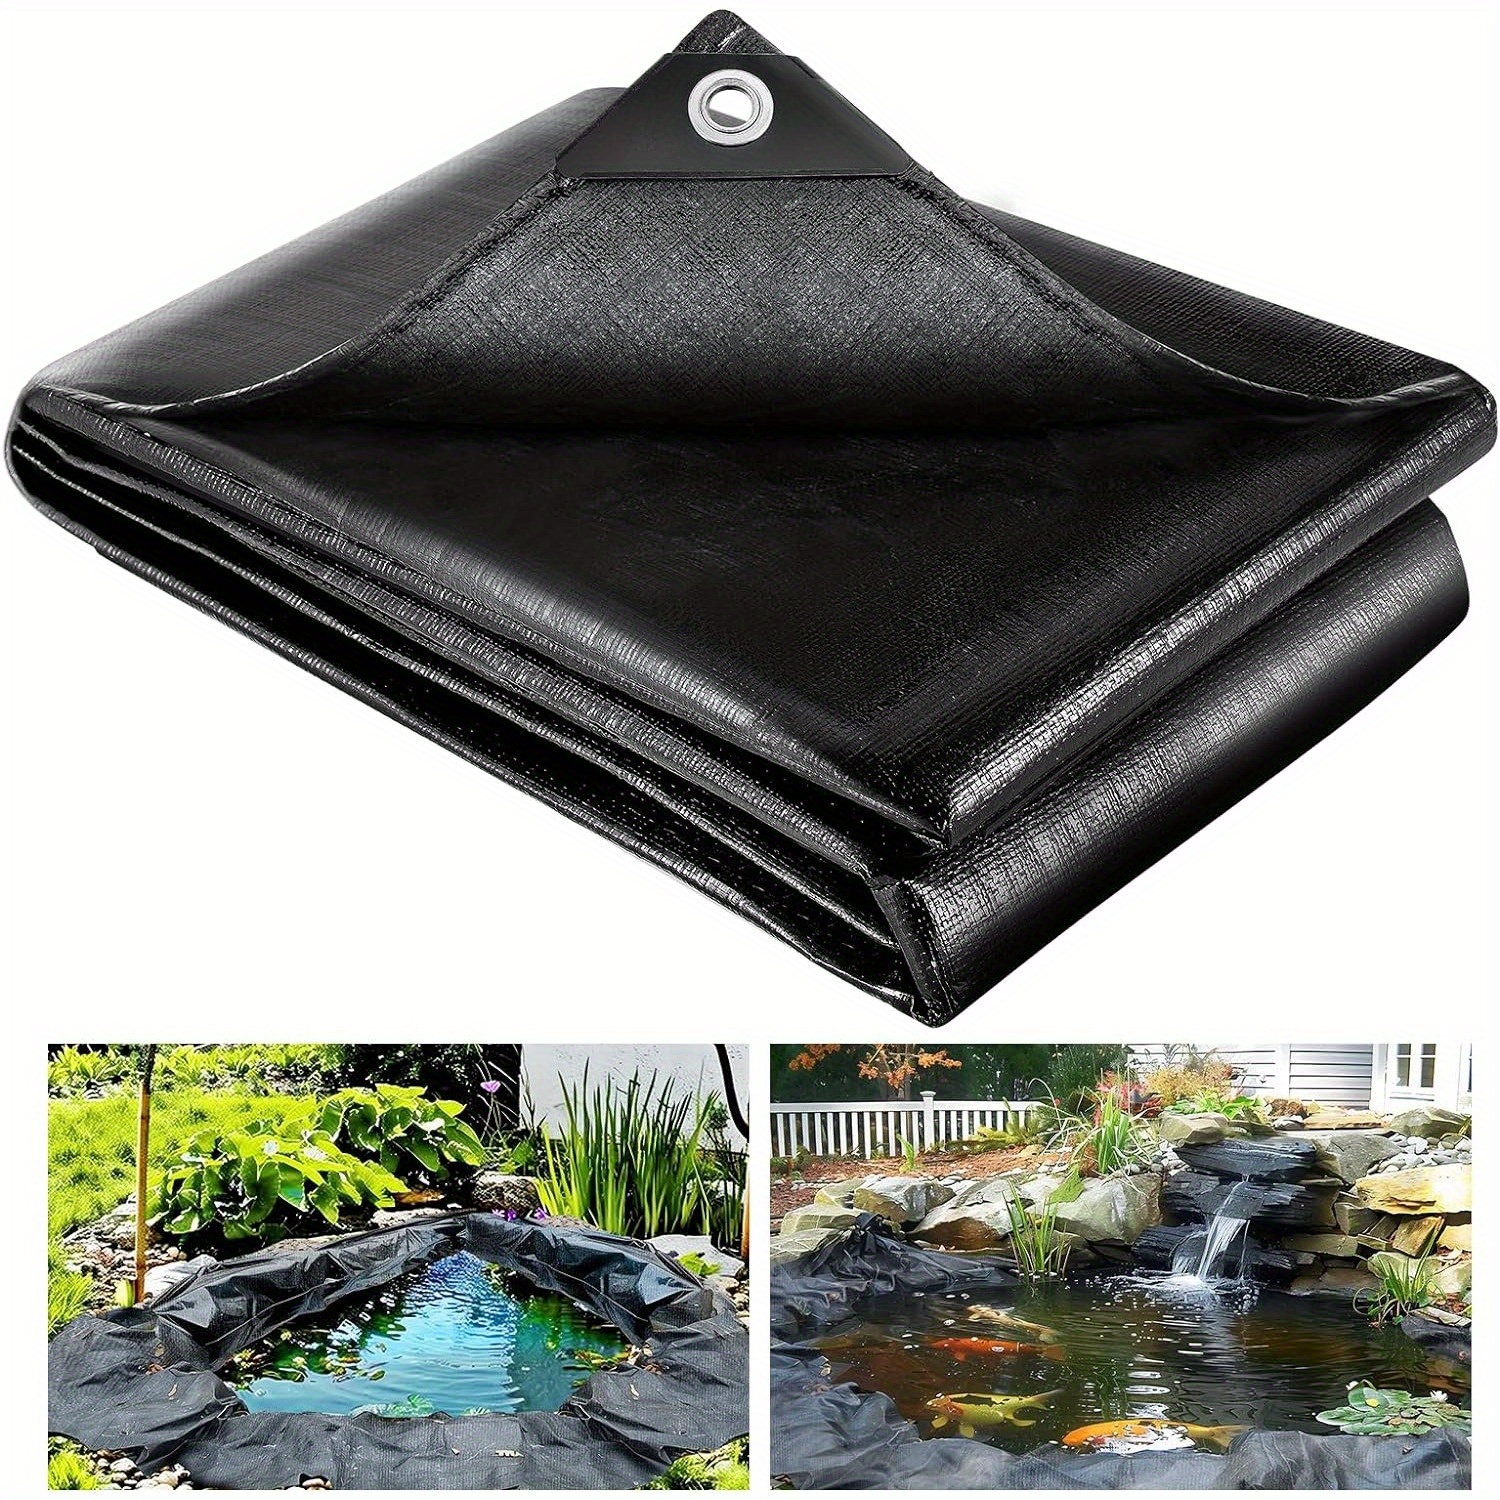 

10 X 13 Feet , 20 Mil Pond Liners Black Hdpe Pond Skin, For Outdoor Ponds, Water Gardens, Waterfall, Fountain, Fish Koi Ponds